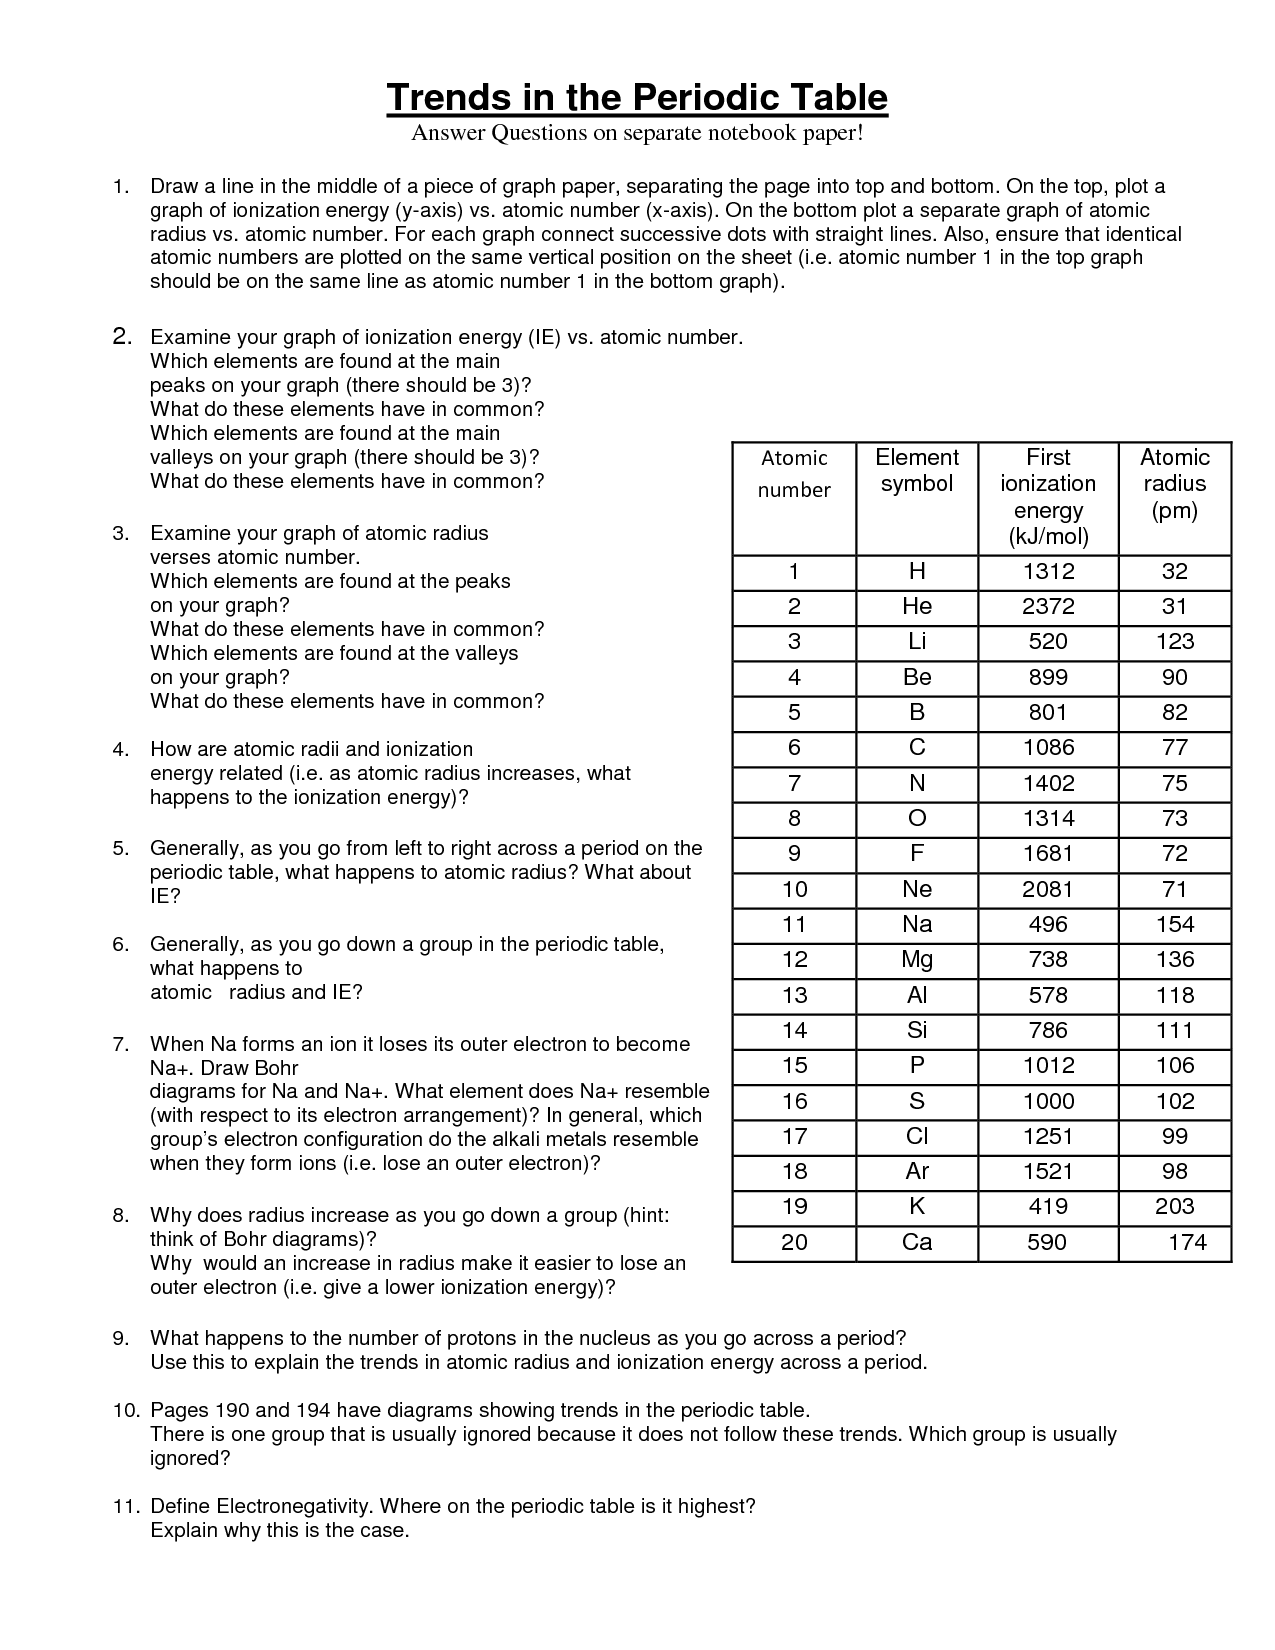 Periodic Table Trends Worksheet Answer Key Image